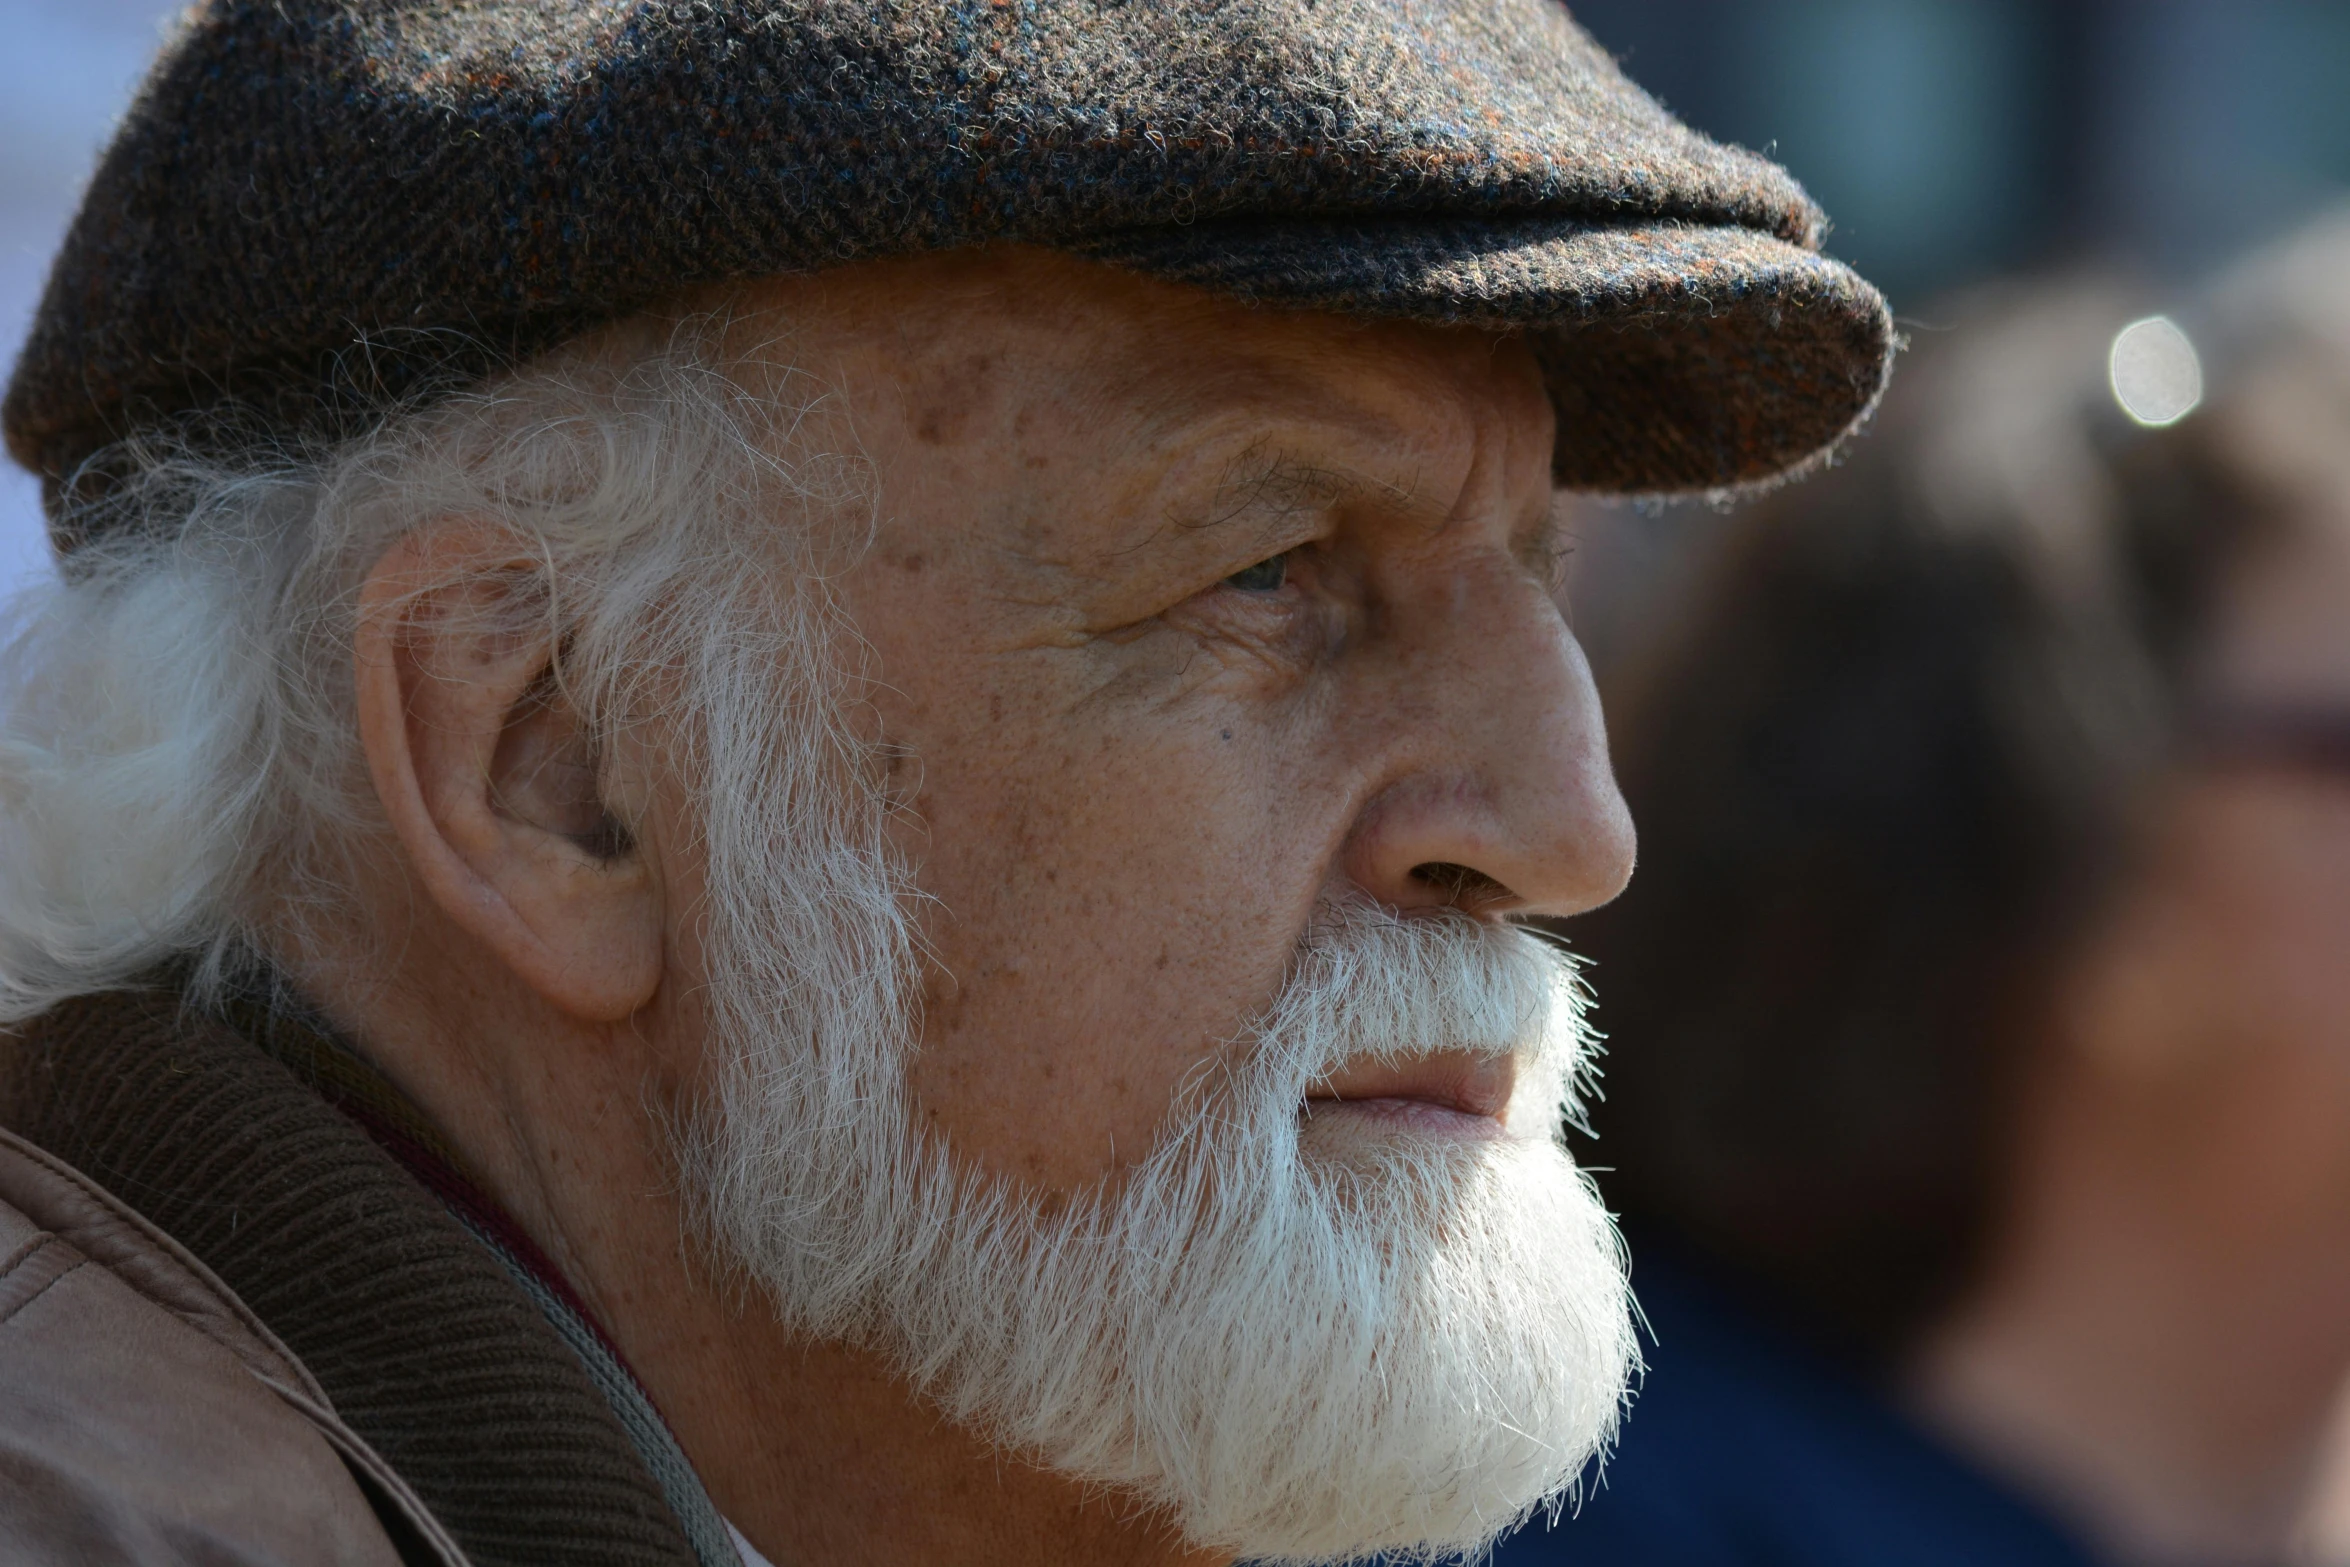 an old man wearing a hat looks away from the camera